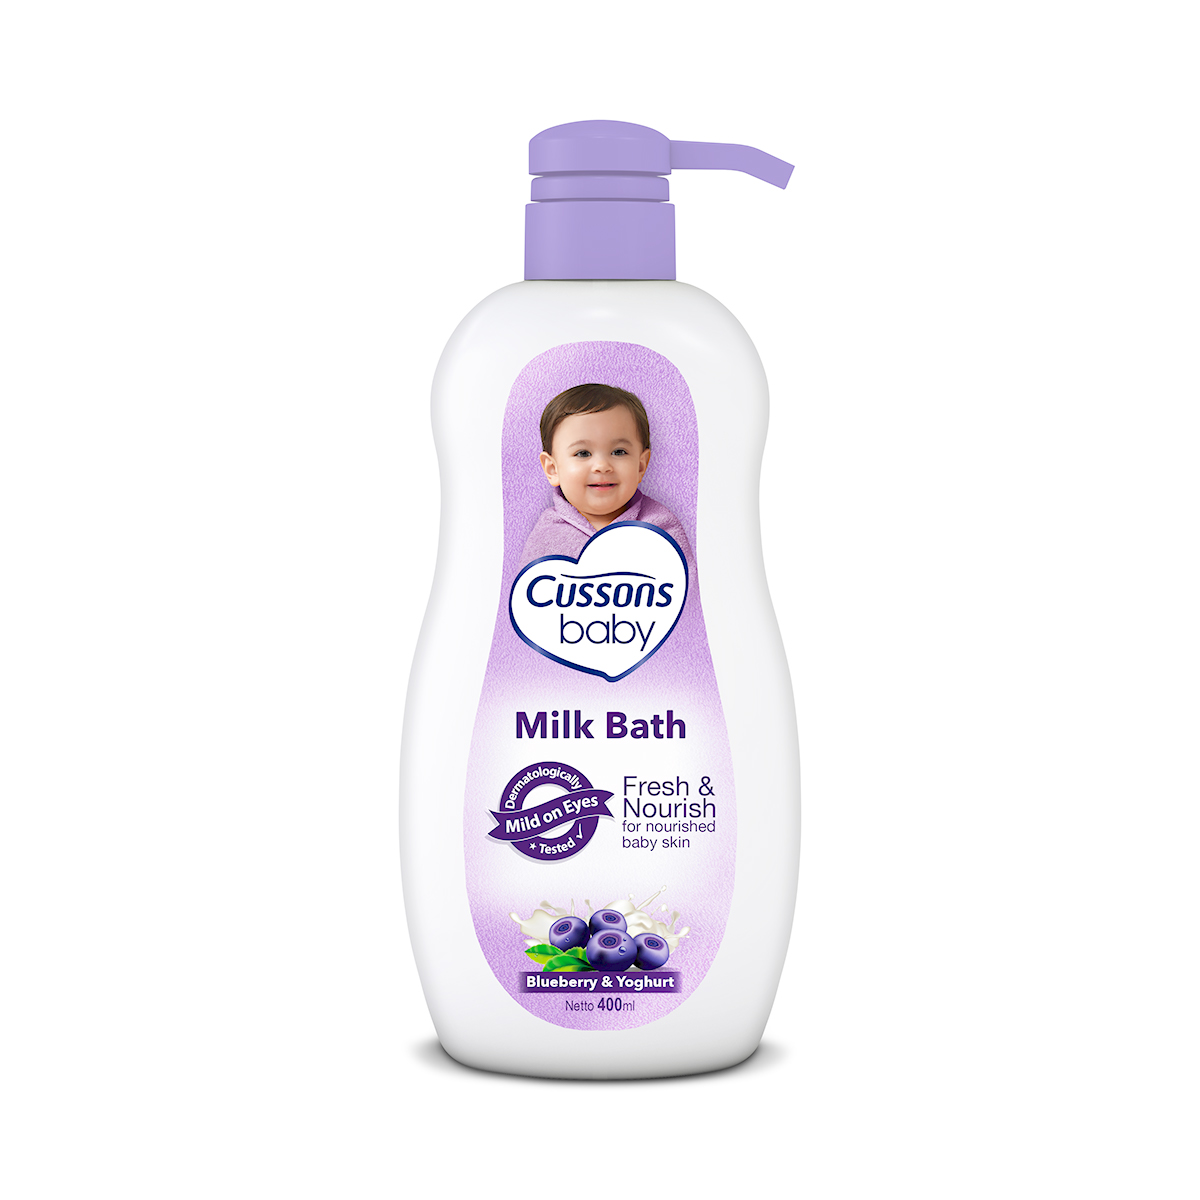 ttm Cussons Baby Fresh & Nourish cinema 4d product modelling baby product physical render lighting